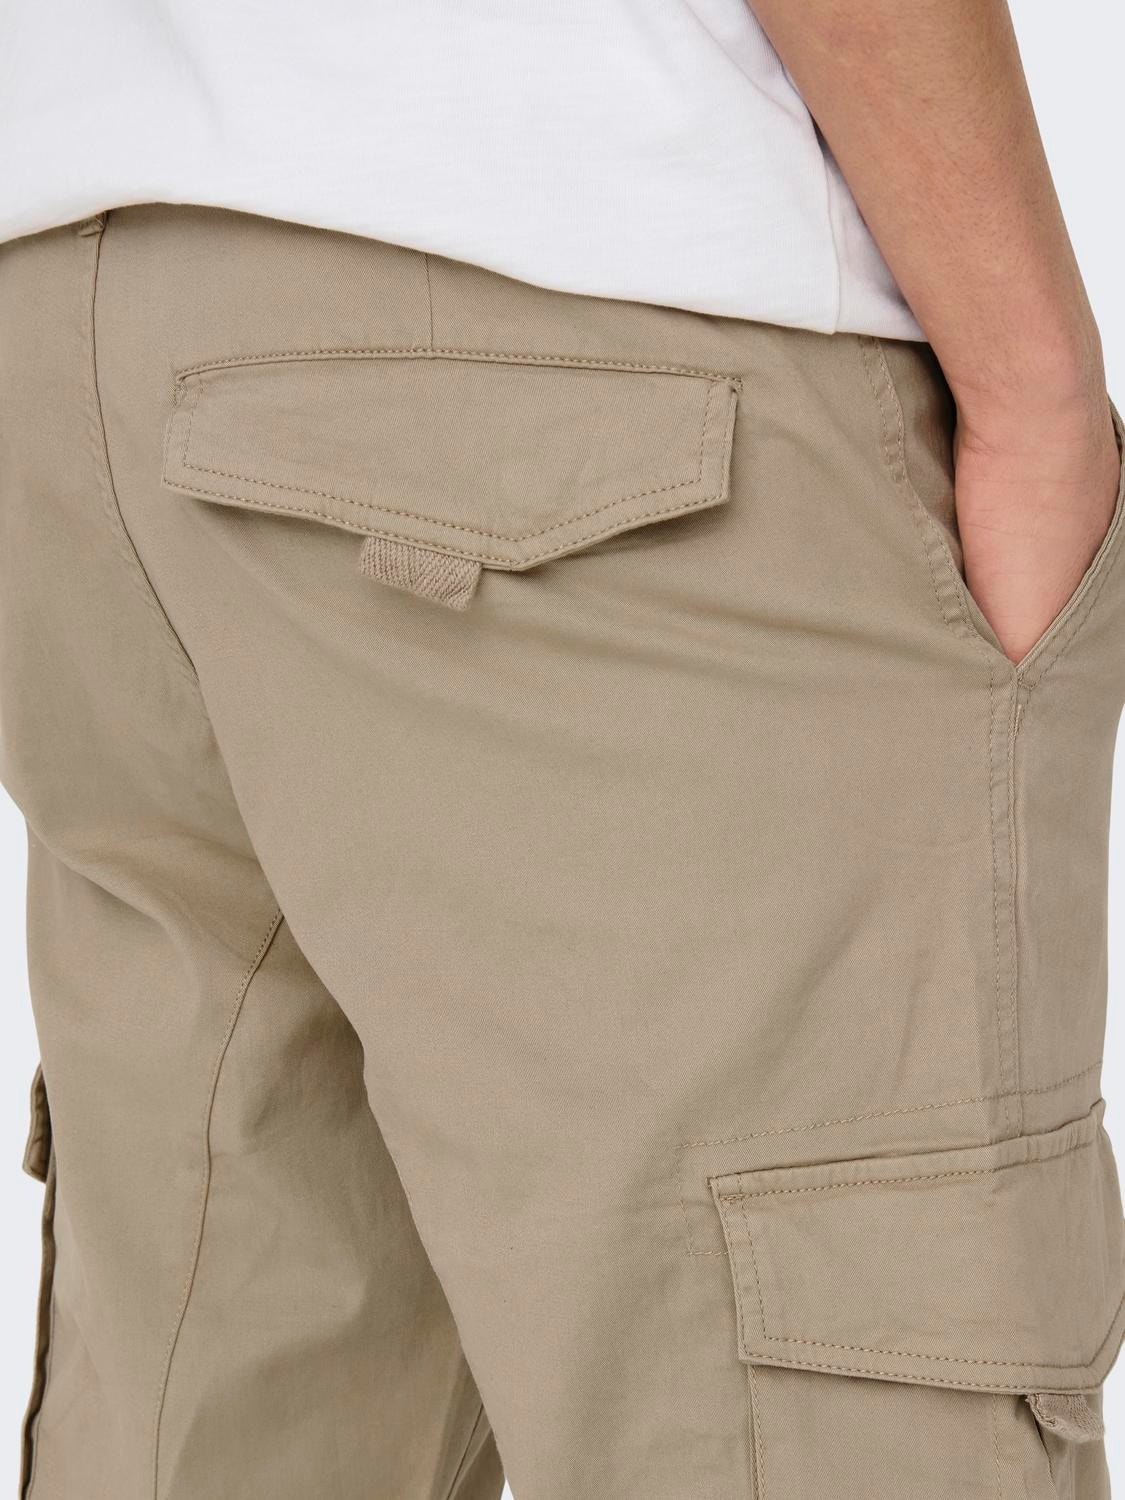 ONLY & SONS ONSDEAN LIFE TAP CARGO 0032 PANT NOOS -Crockery - 22025431